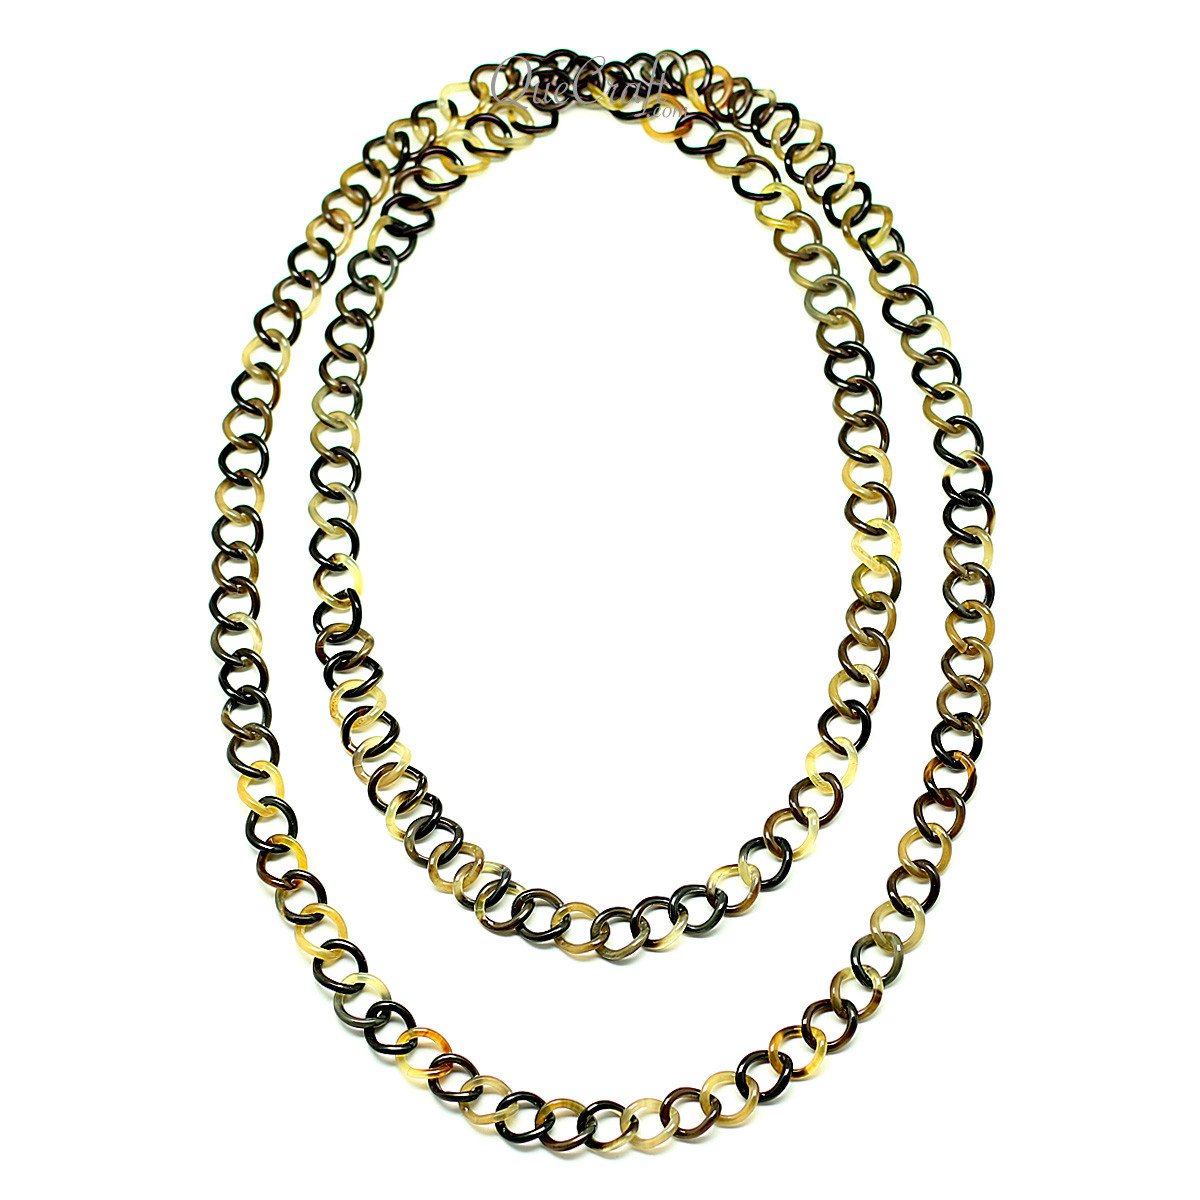 Horn Chain Necklace #12705 - HORN JEWELRY